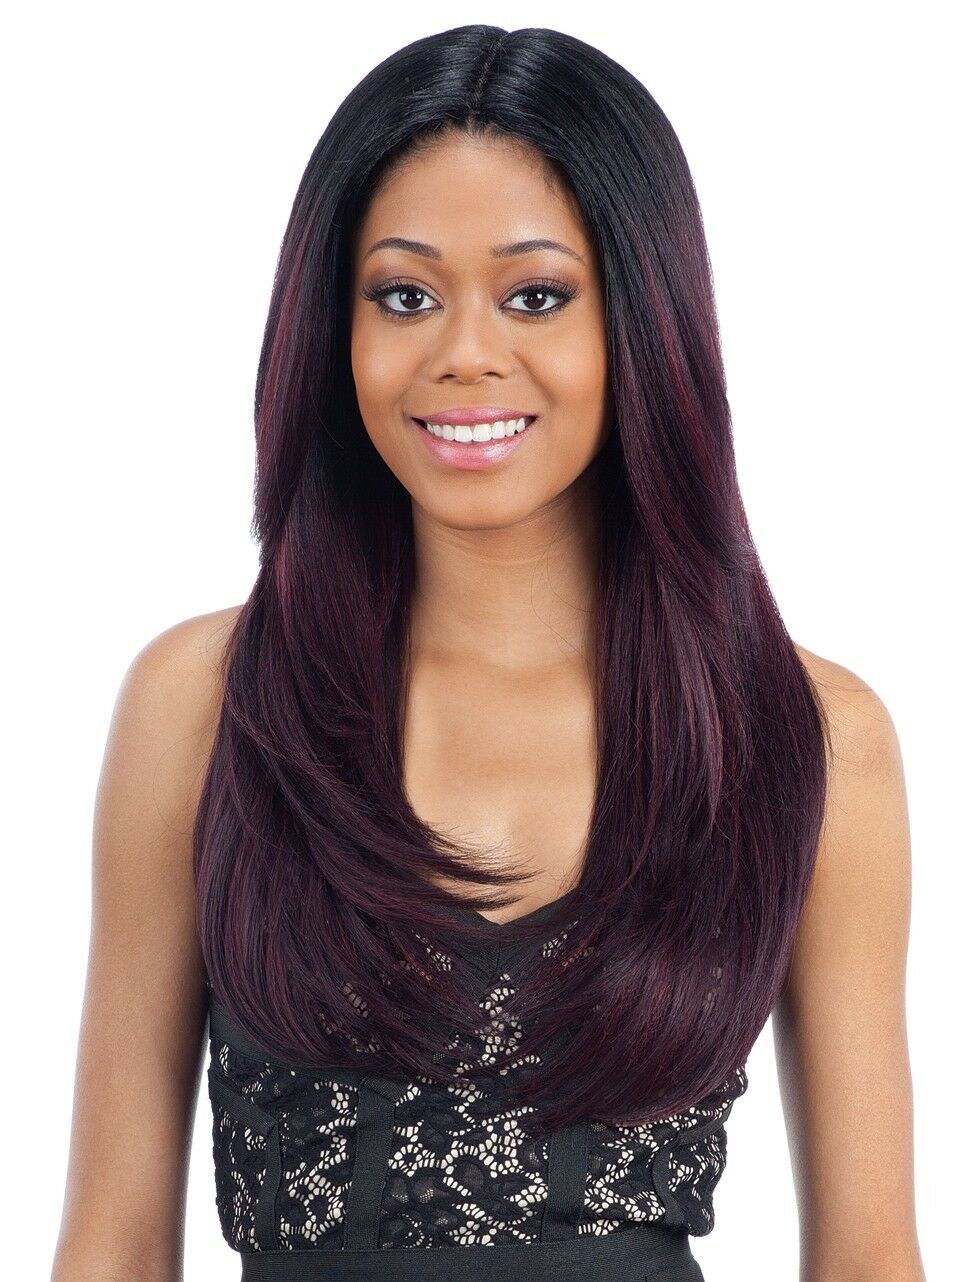 FREETRESS EQUAL 6 INCH LACE PART LONG STRAIGHT HAIR WIG MAC